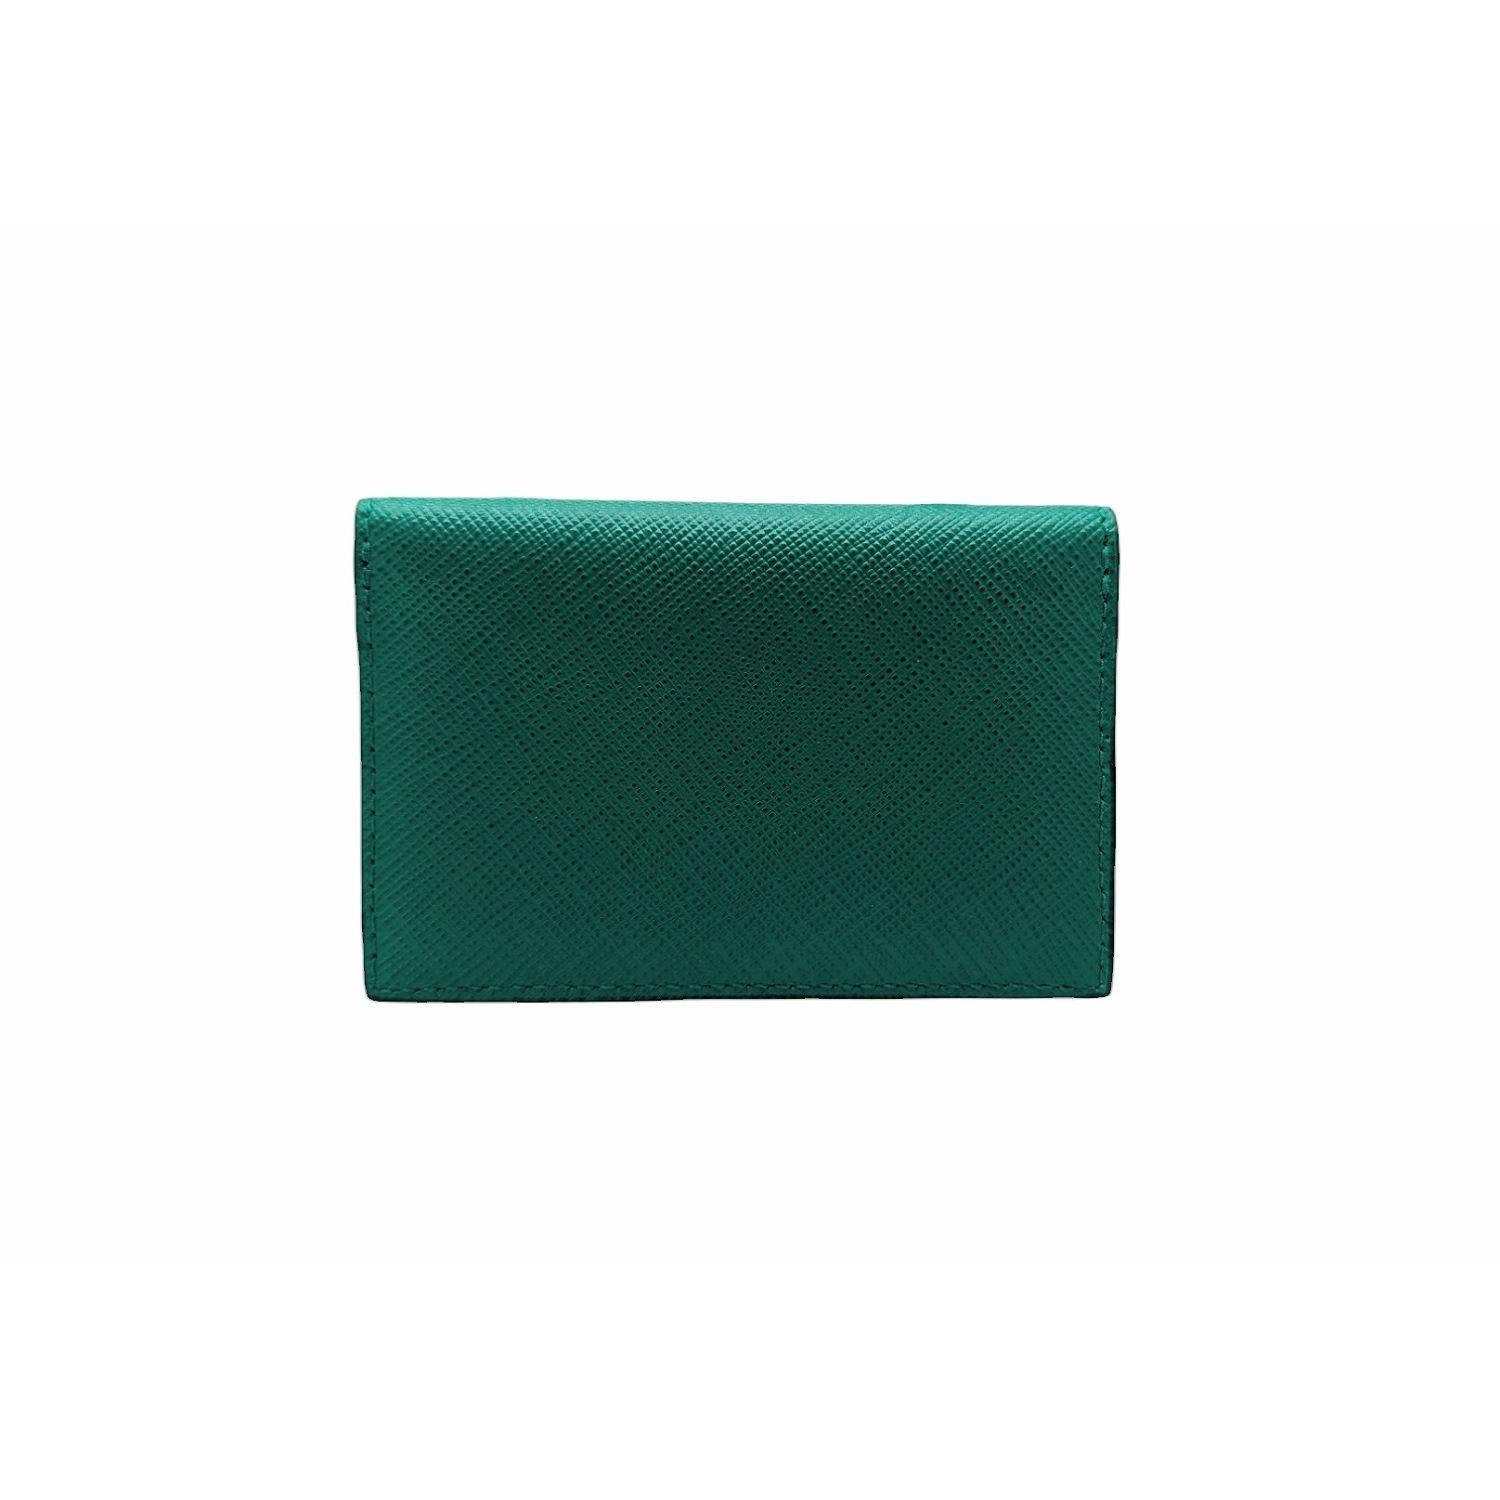 This refined, modern, Saffiano-leather card holder features an iconic, enameled-metal triangle logo, which first appeared on trunks designed by Mario Prada in 1913. Made in Italy.

Designer: Prada
Material: Saffiano Lux Leather
Color: Mango